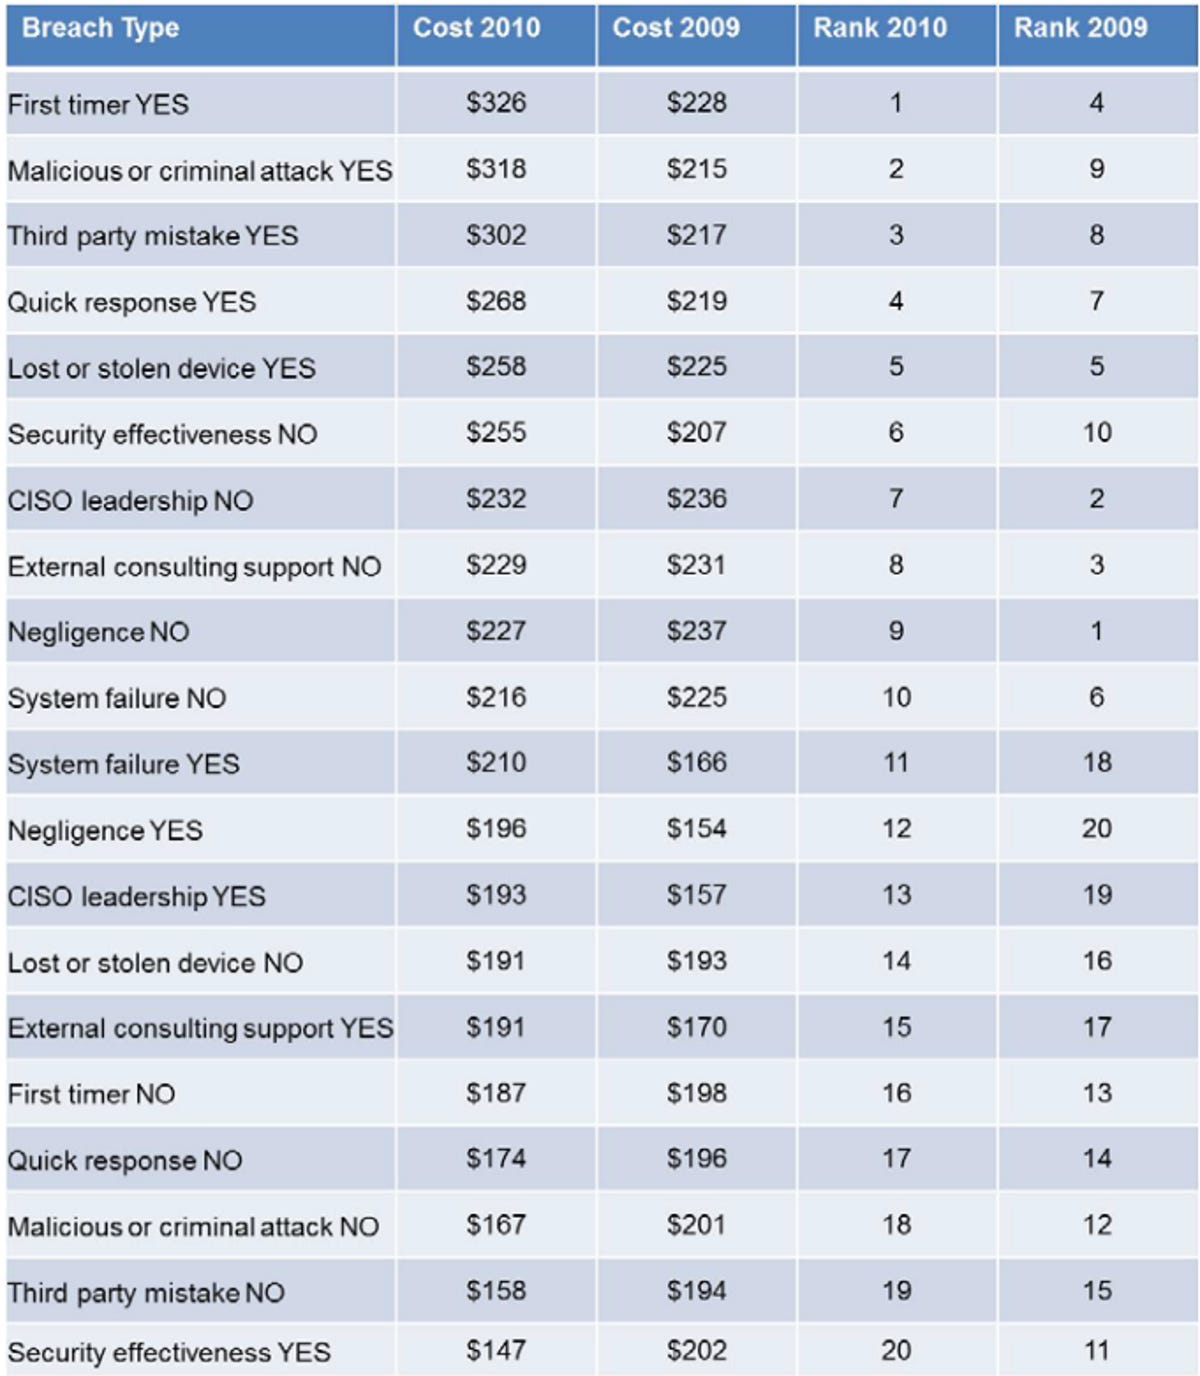 Breach costs and ranking by type of breach, 2009 and 2010.